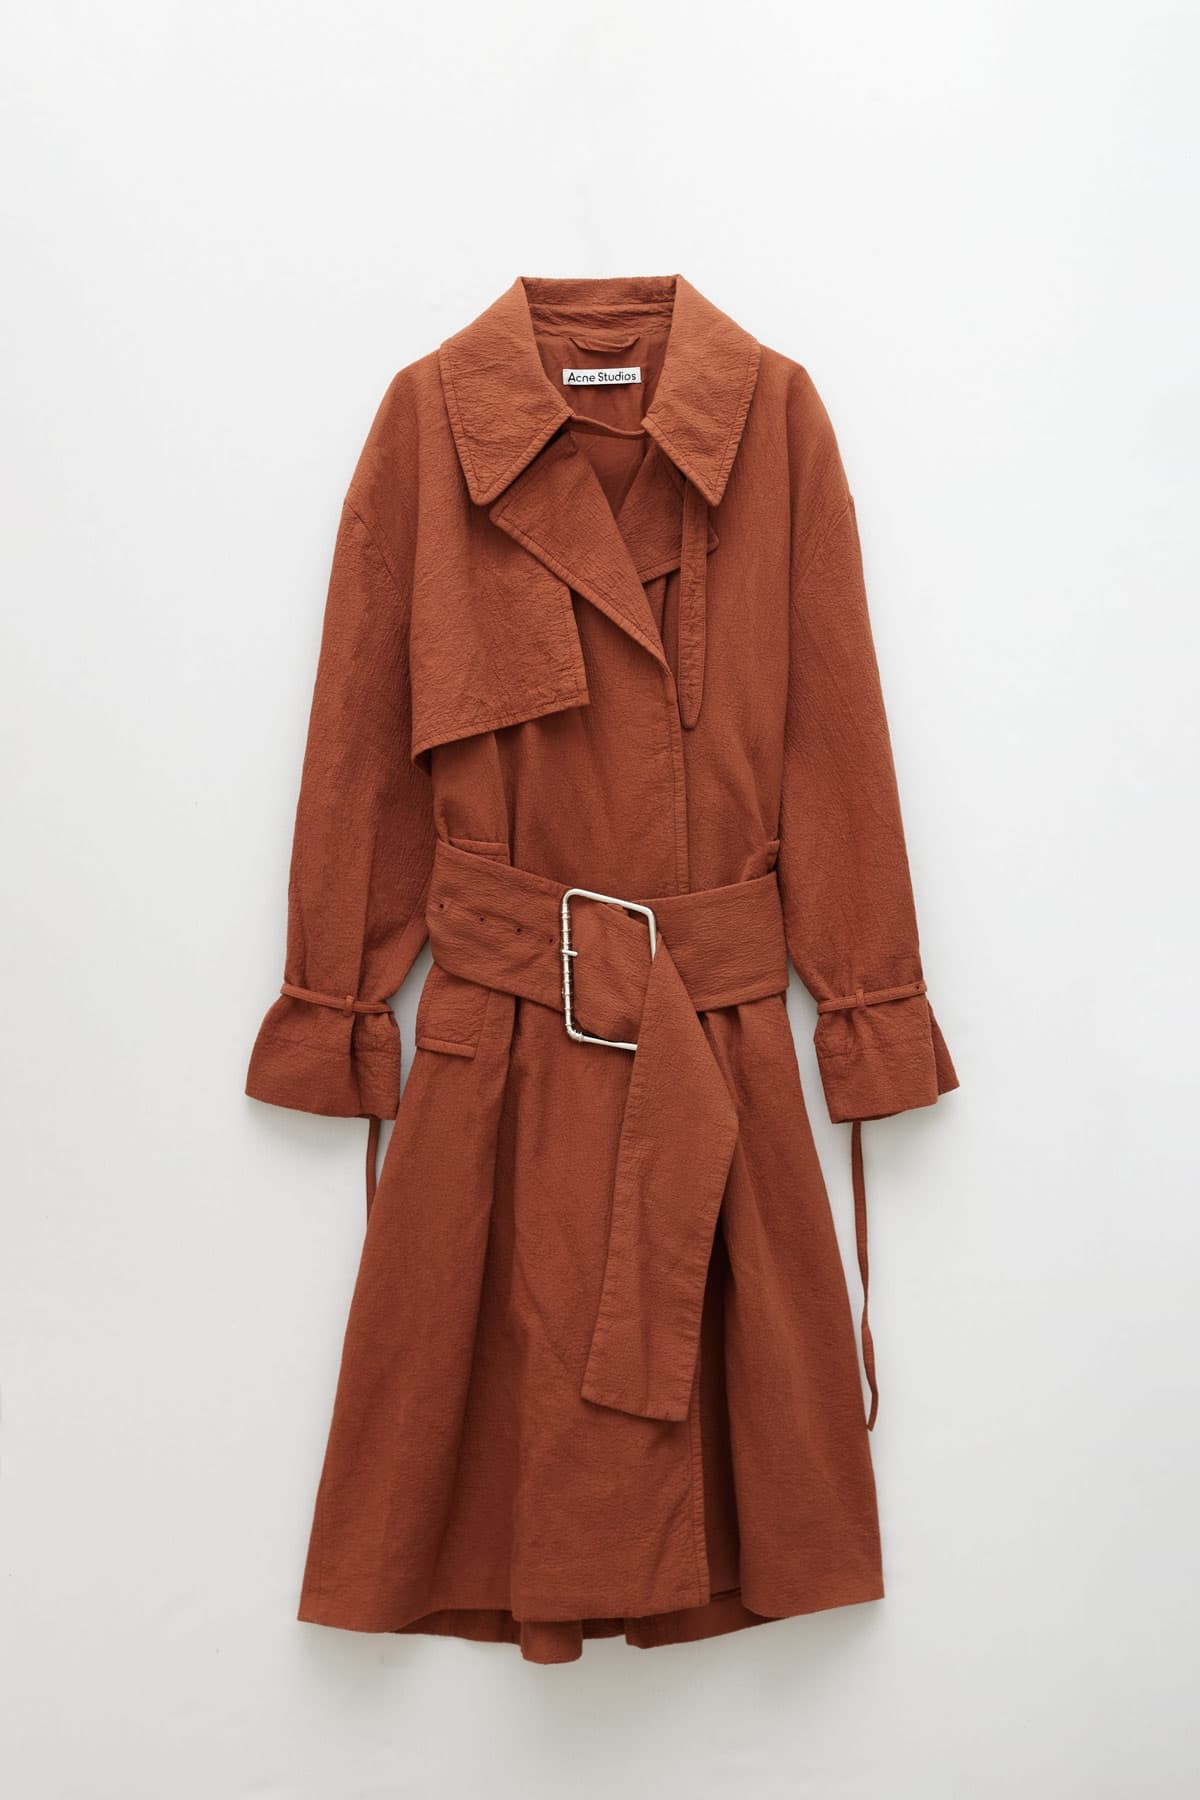 ACNE STUDIOS WALNUT BROWN BELTED TRENCH COAT IAMNUE